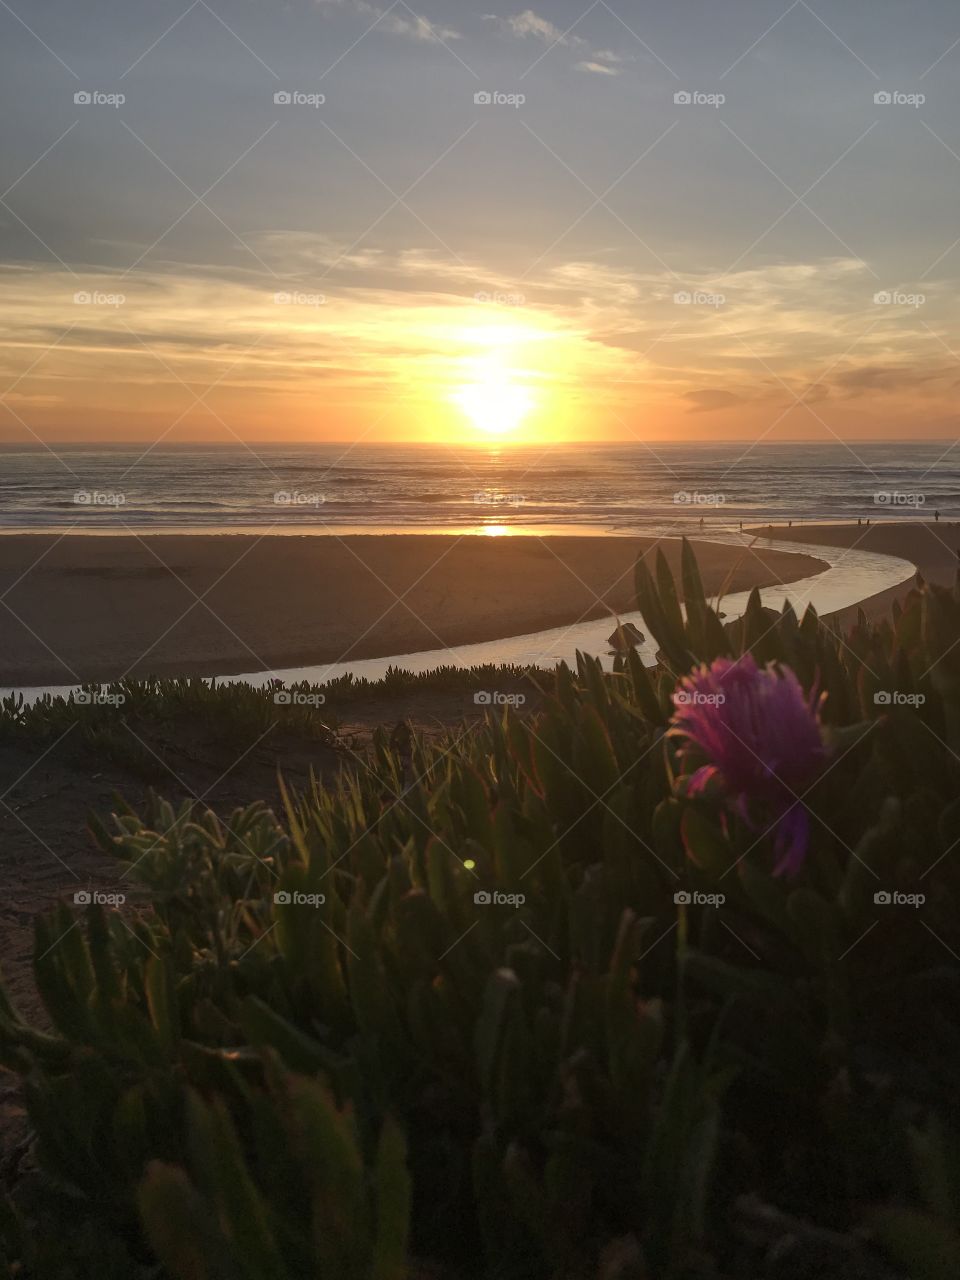 The sun sets on a winding stream that flows in and out of the Pacific. The sun warms the evening air as it’s soon to be tucked behind the horizon line. 